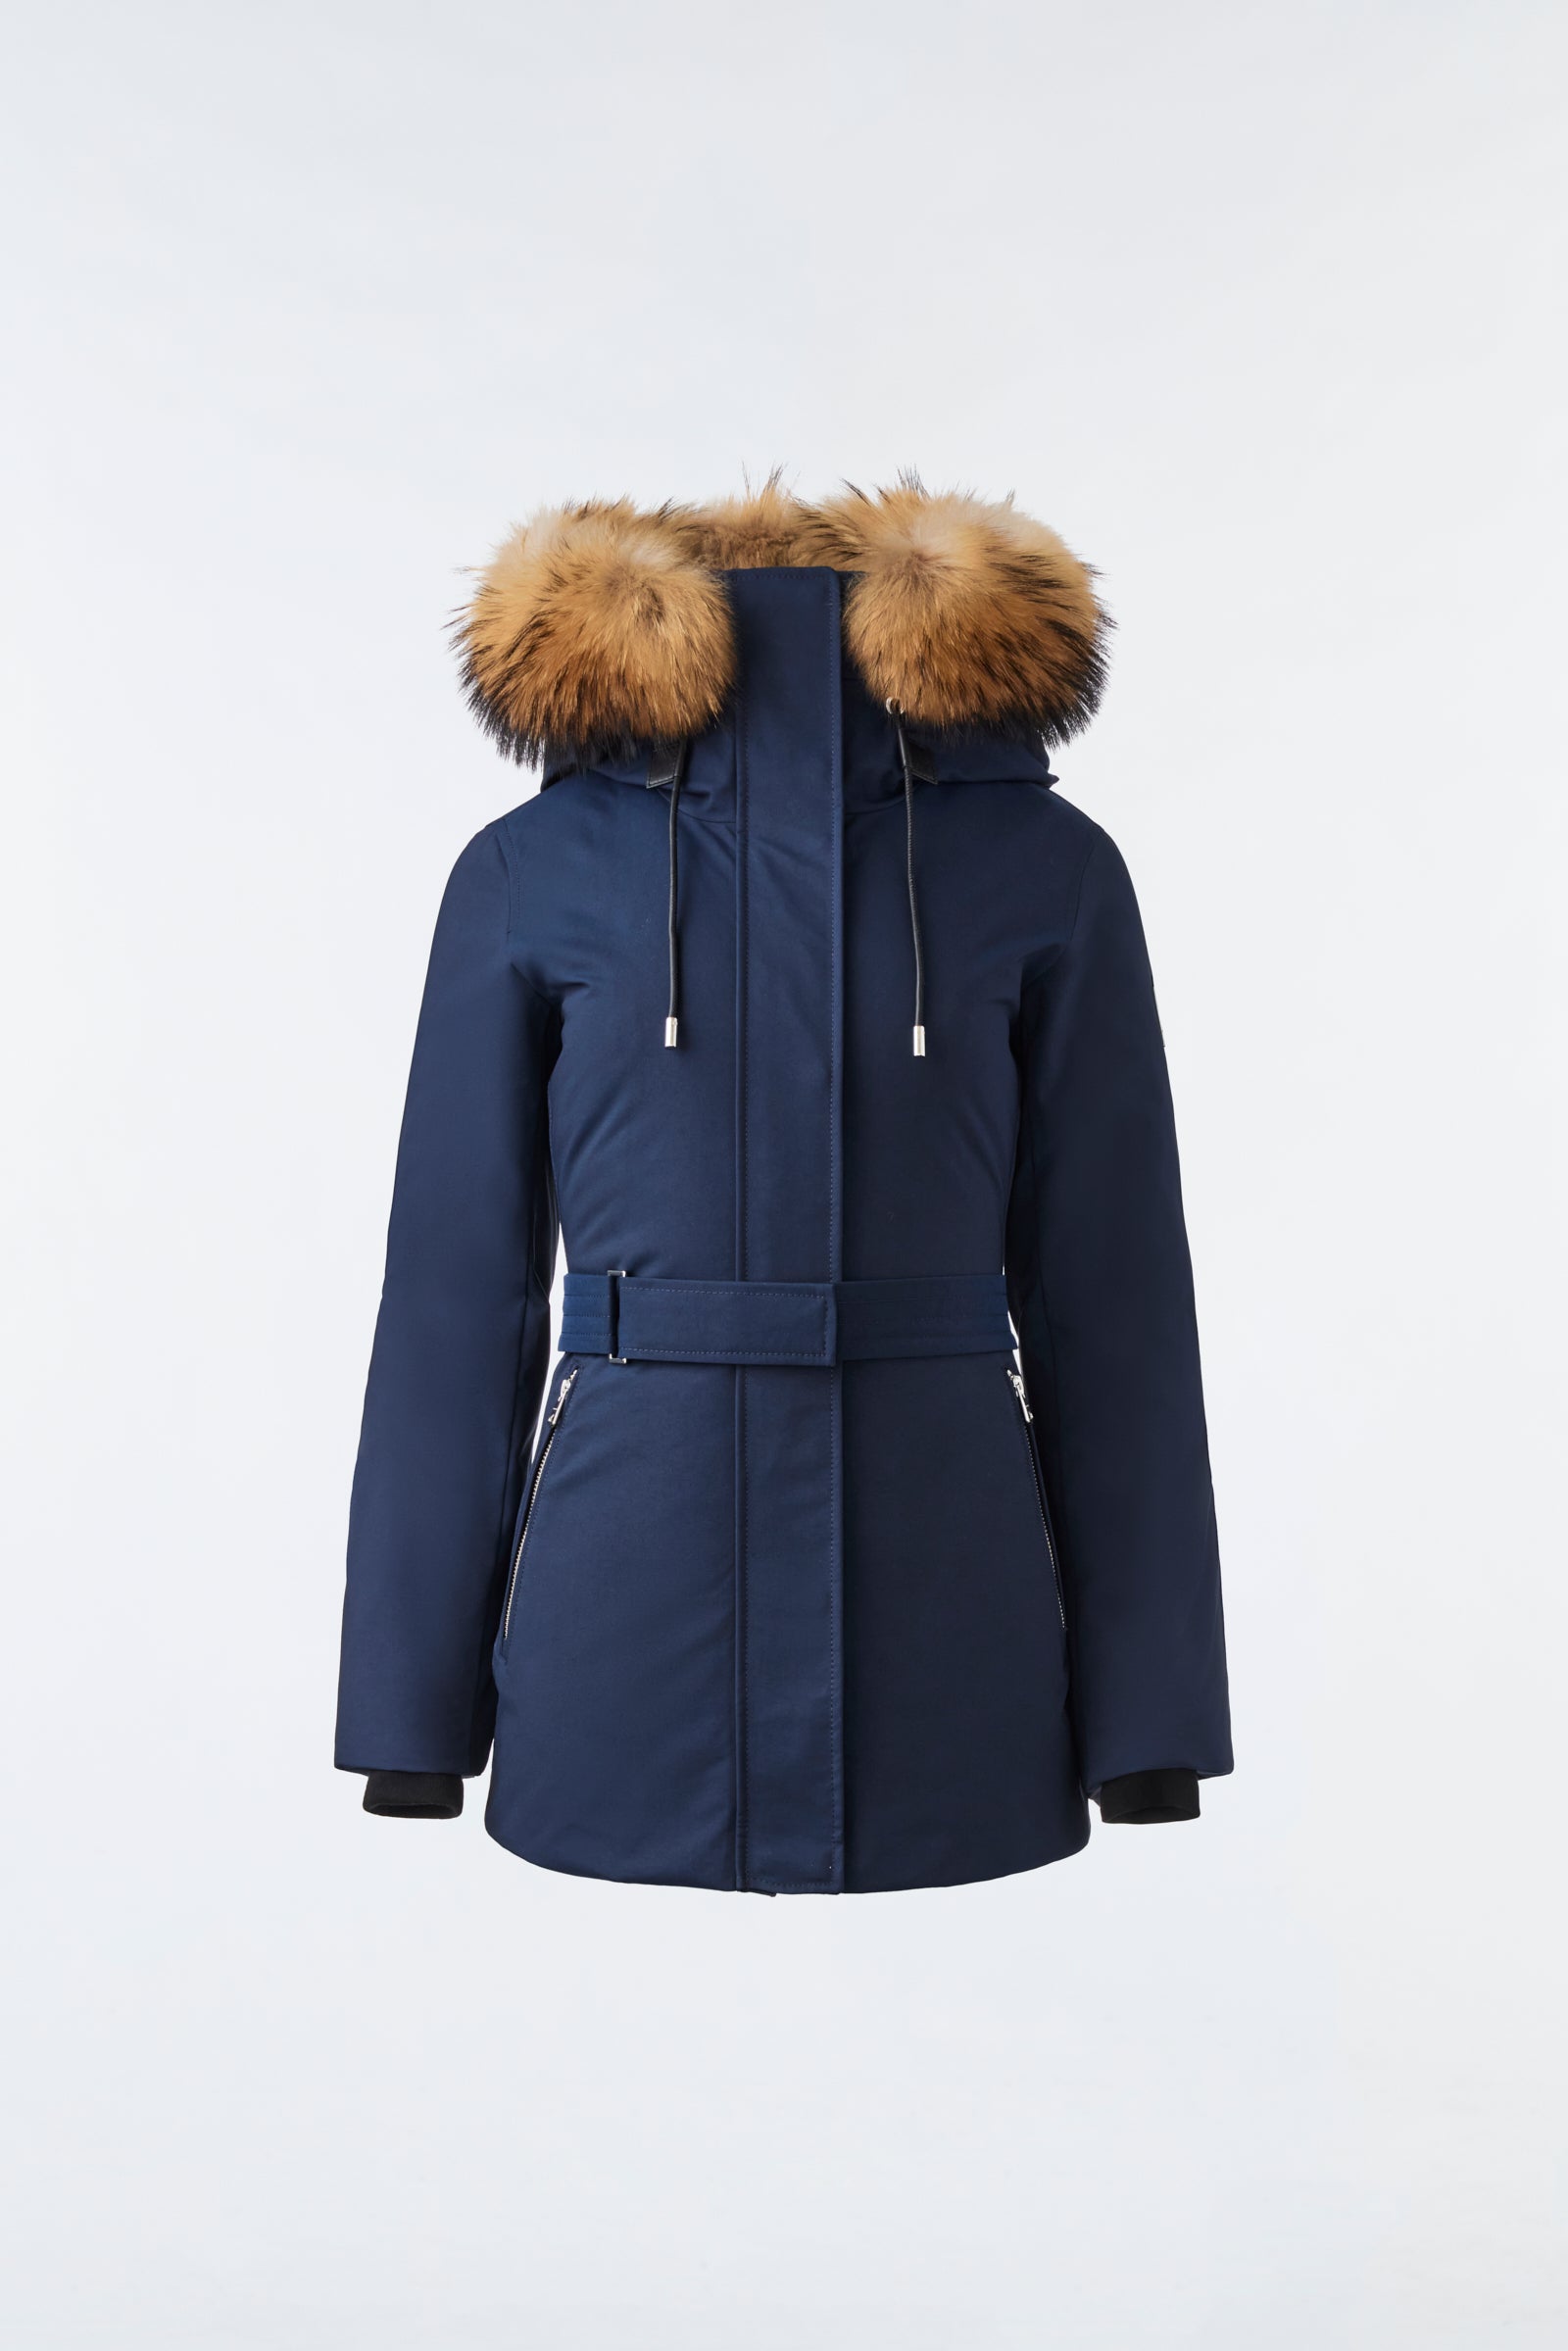 Downs and Parkas for Women | Mackage® EU Official Site